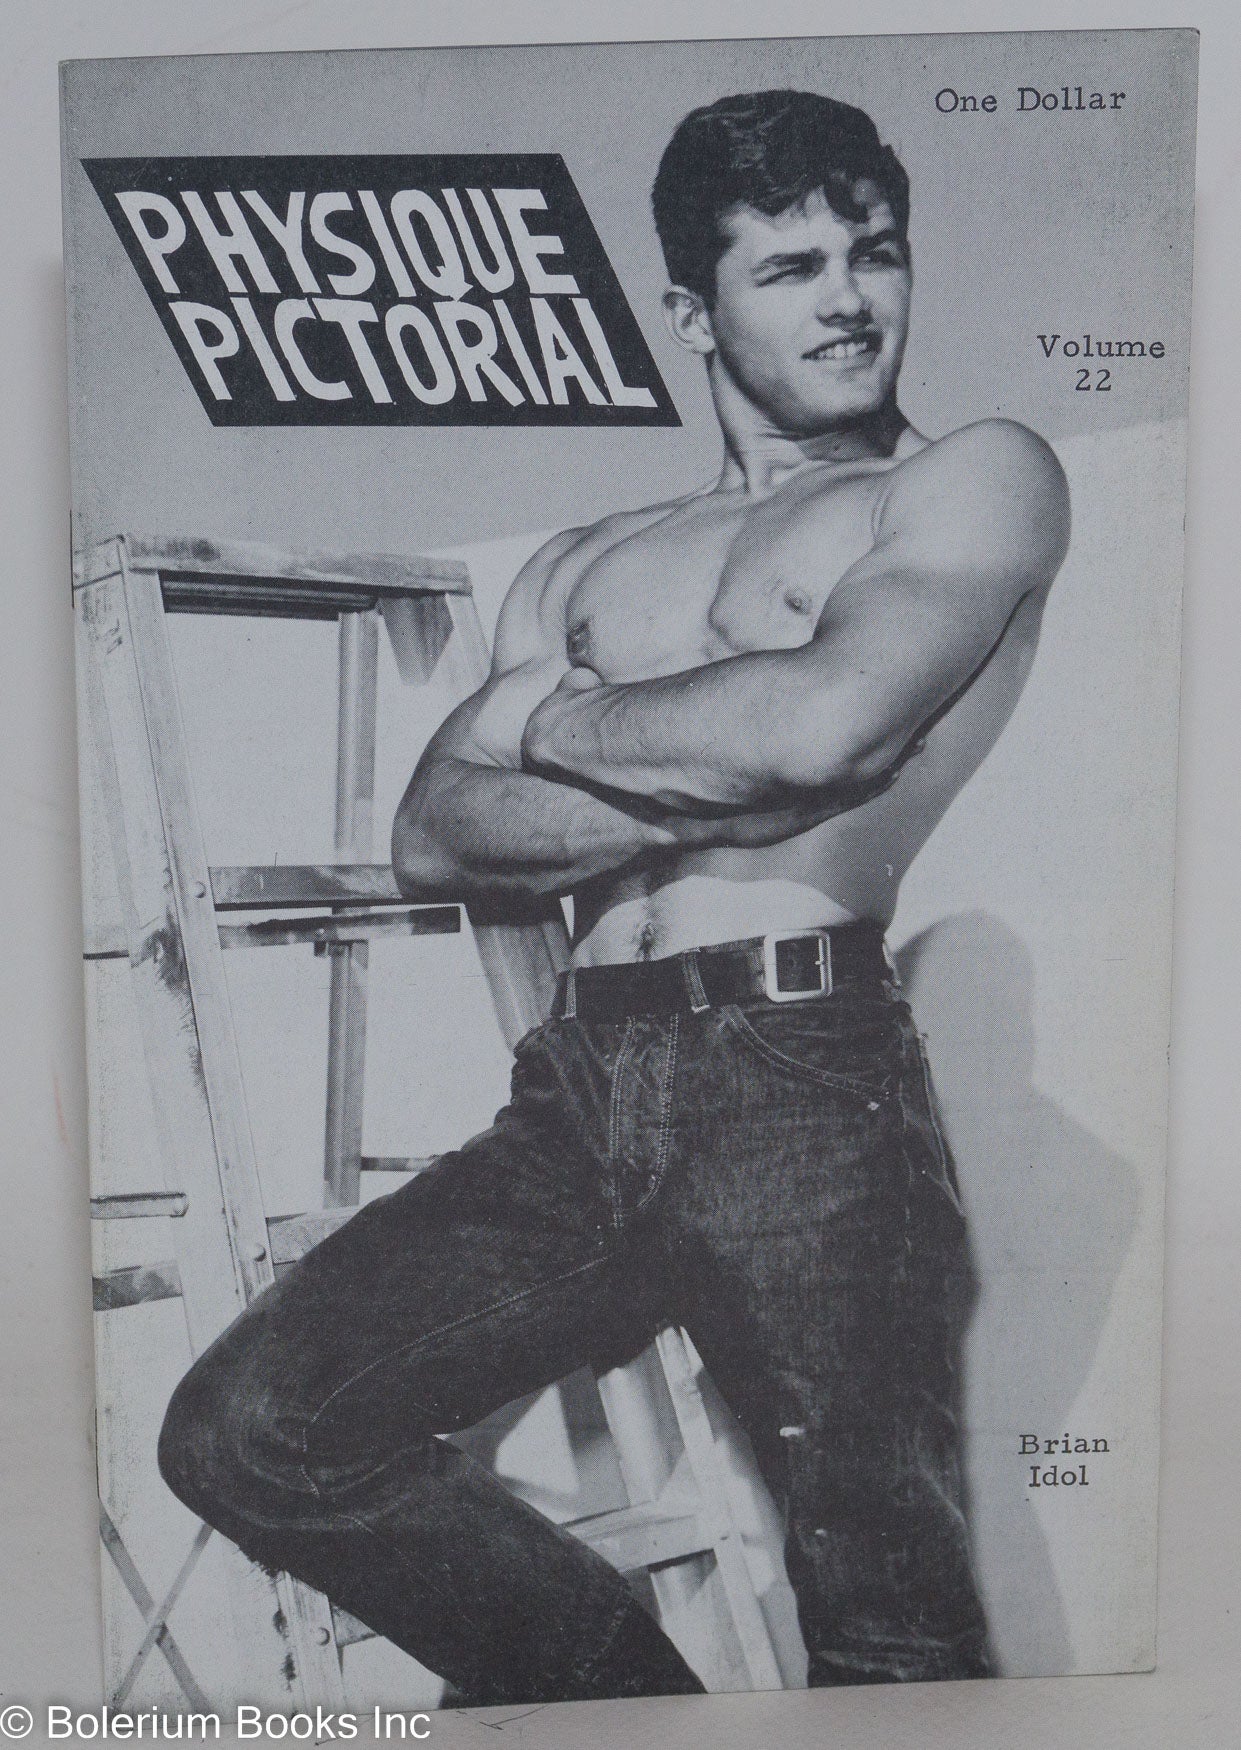 Natural Nudists Porn 1960s - Physique Pictorial vol. 22, April 1973: Brian Idol cover | Bob Mizer, and  photographer